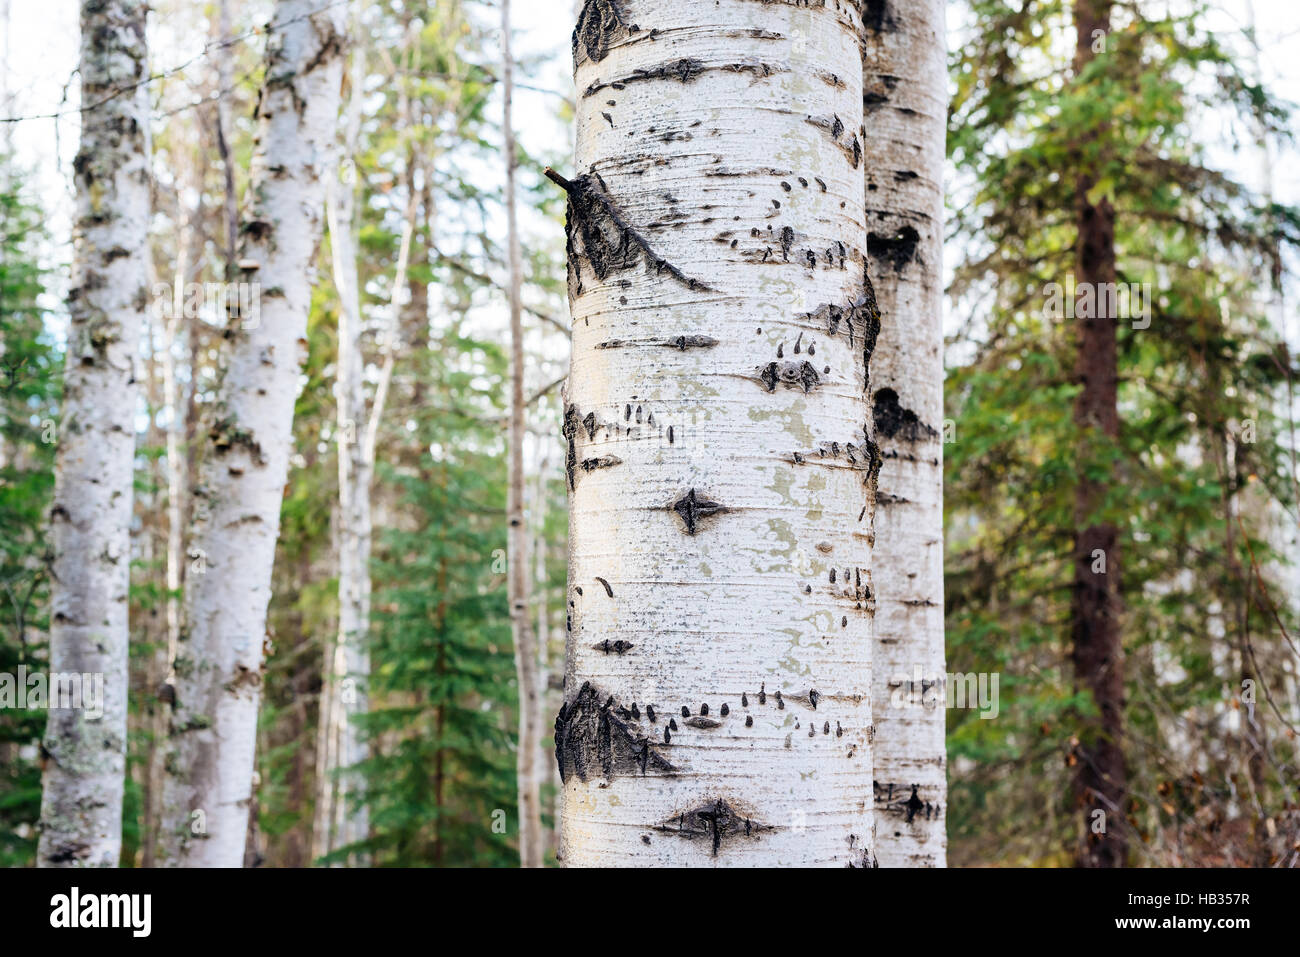 A birch tree scarred by the claws of a bear, near Clearwater, British Columbia, Canada Stock Photo